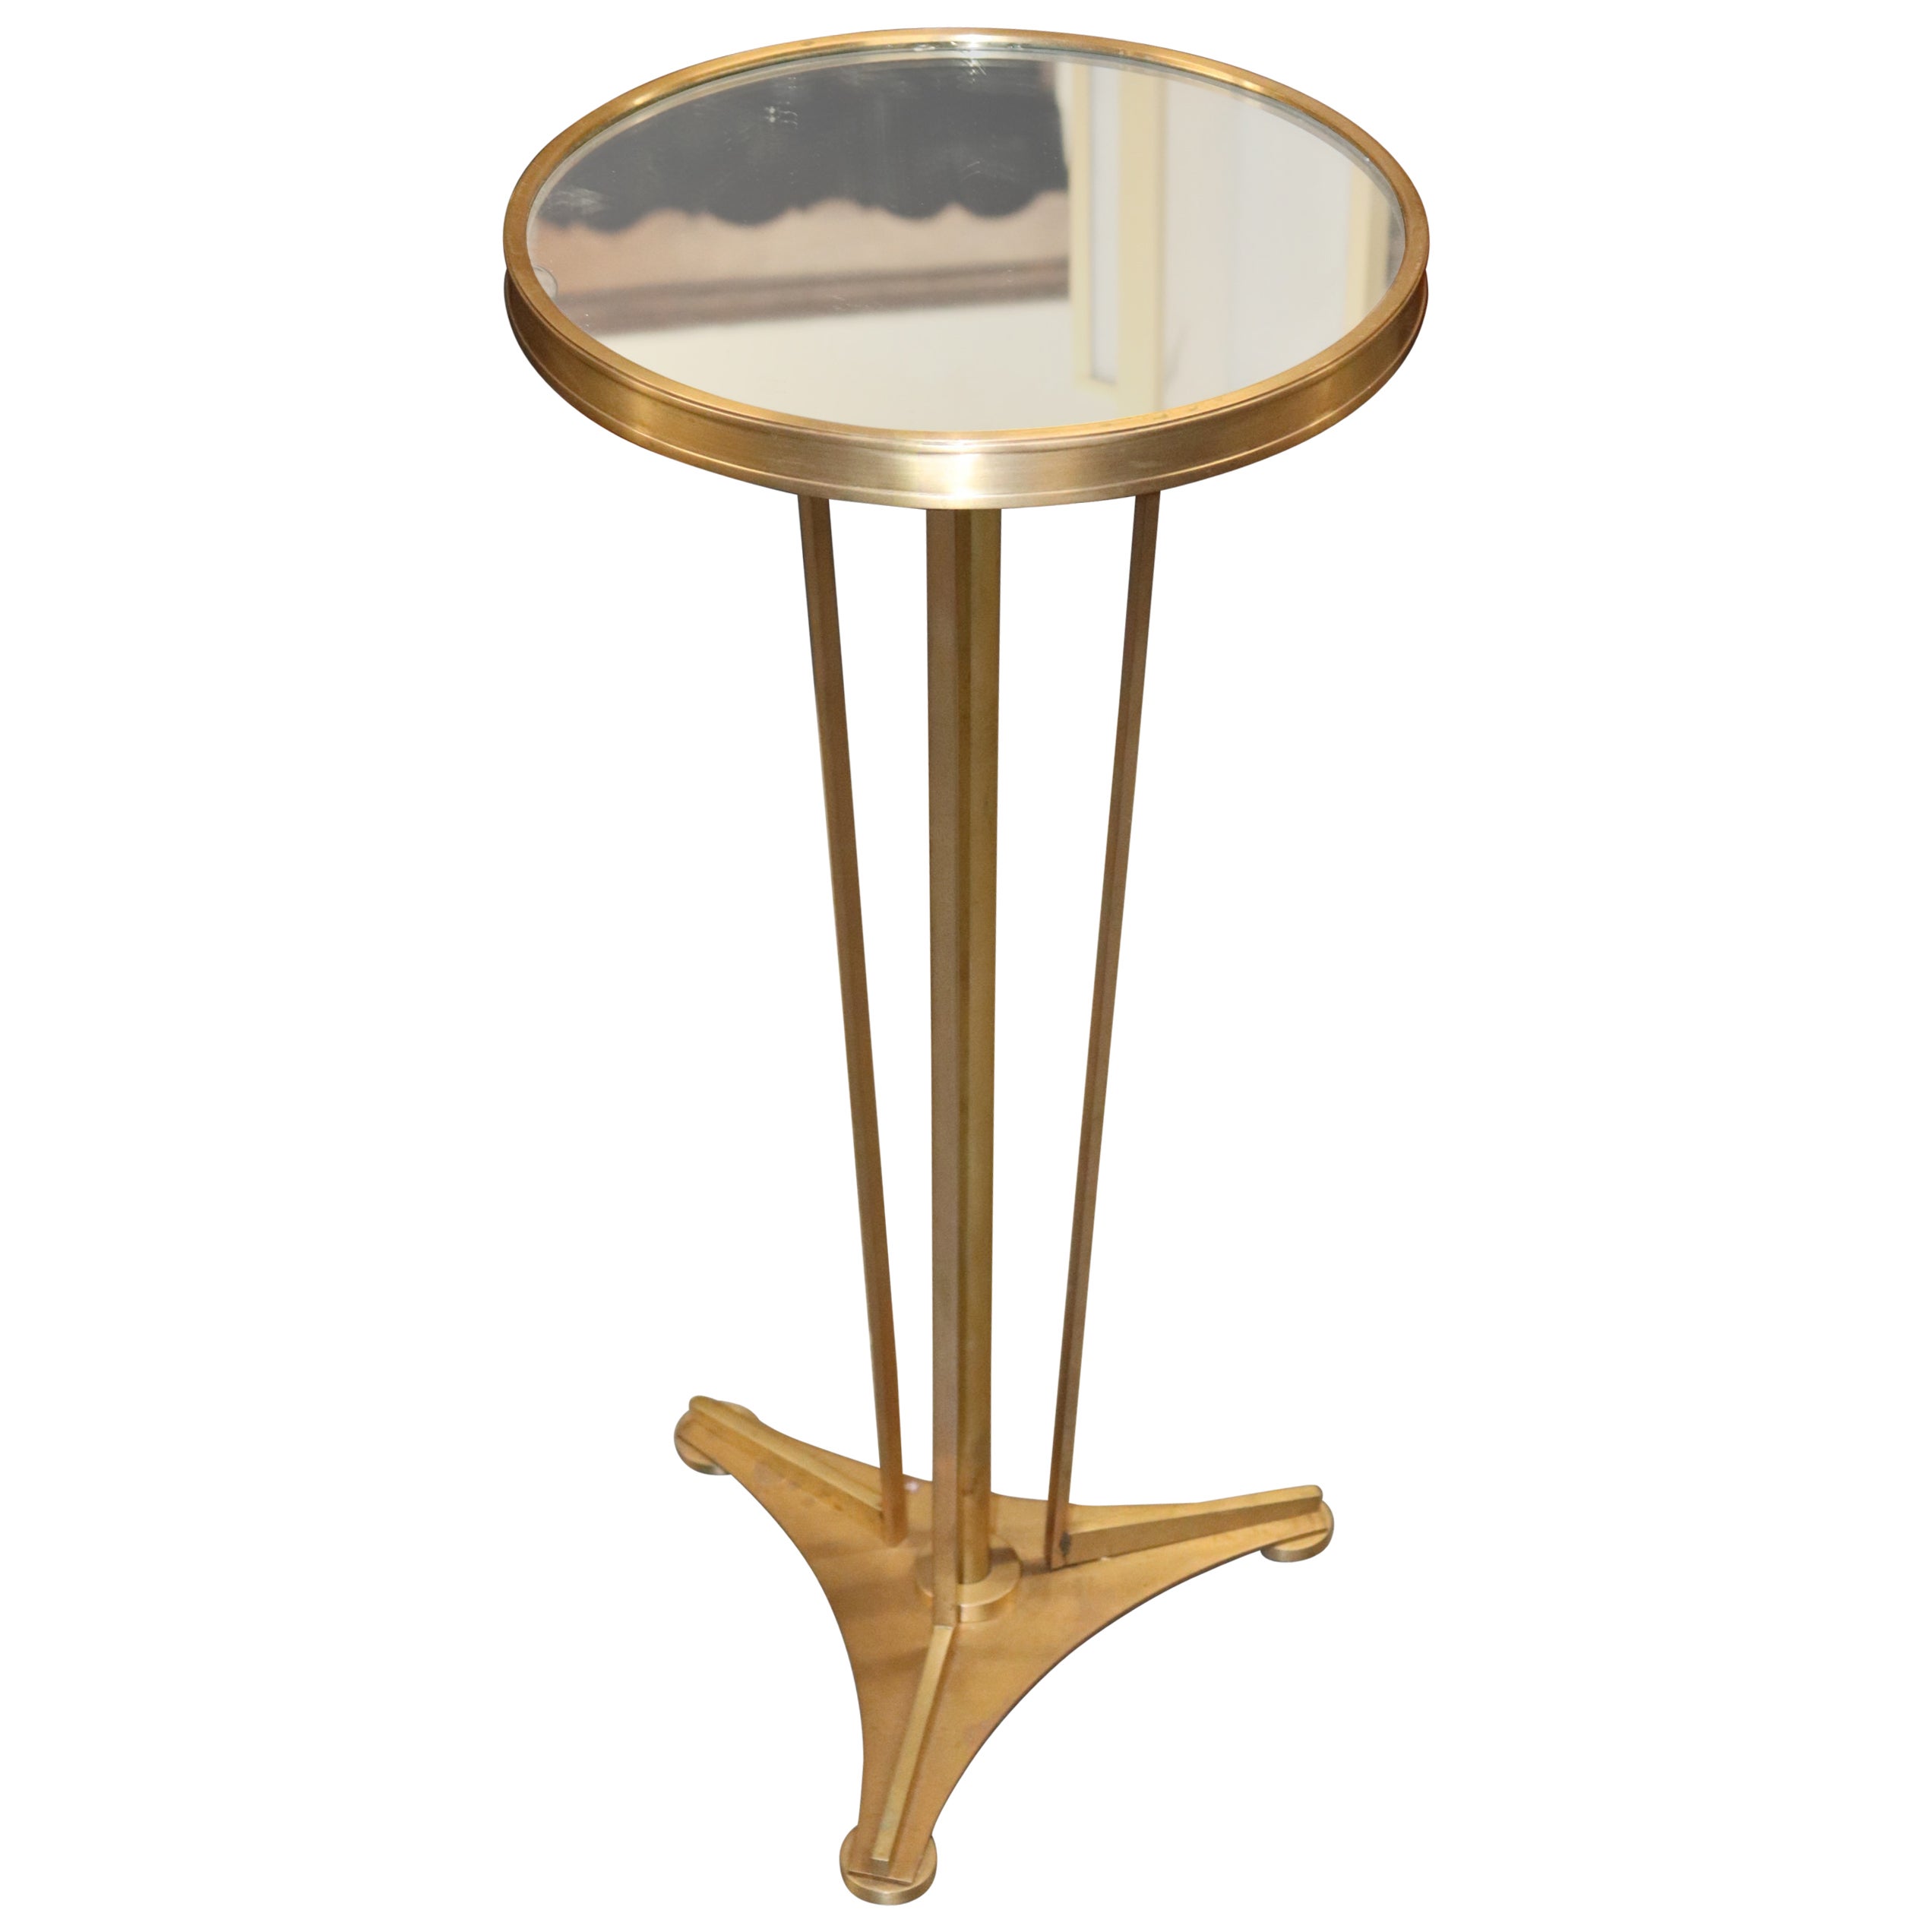 Petite Brass and Mirrored French Art Deco Style Vintage Gueridon End Table 